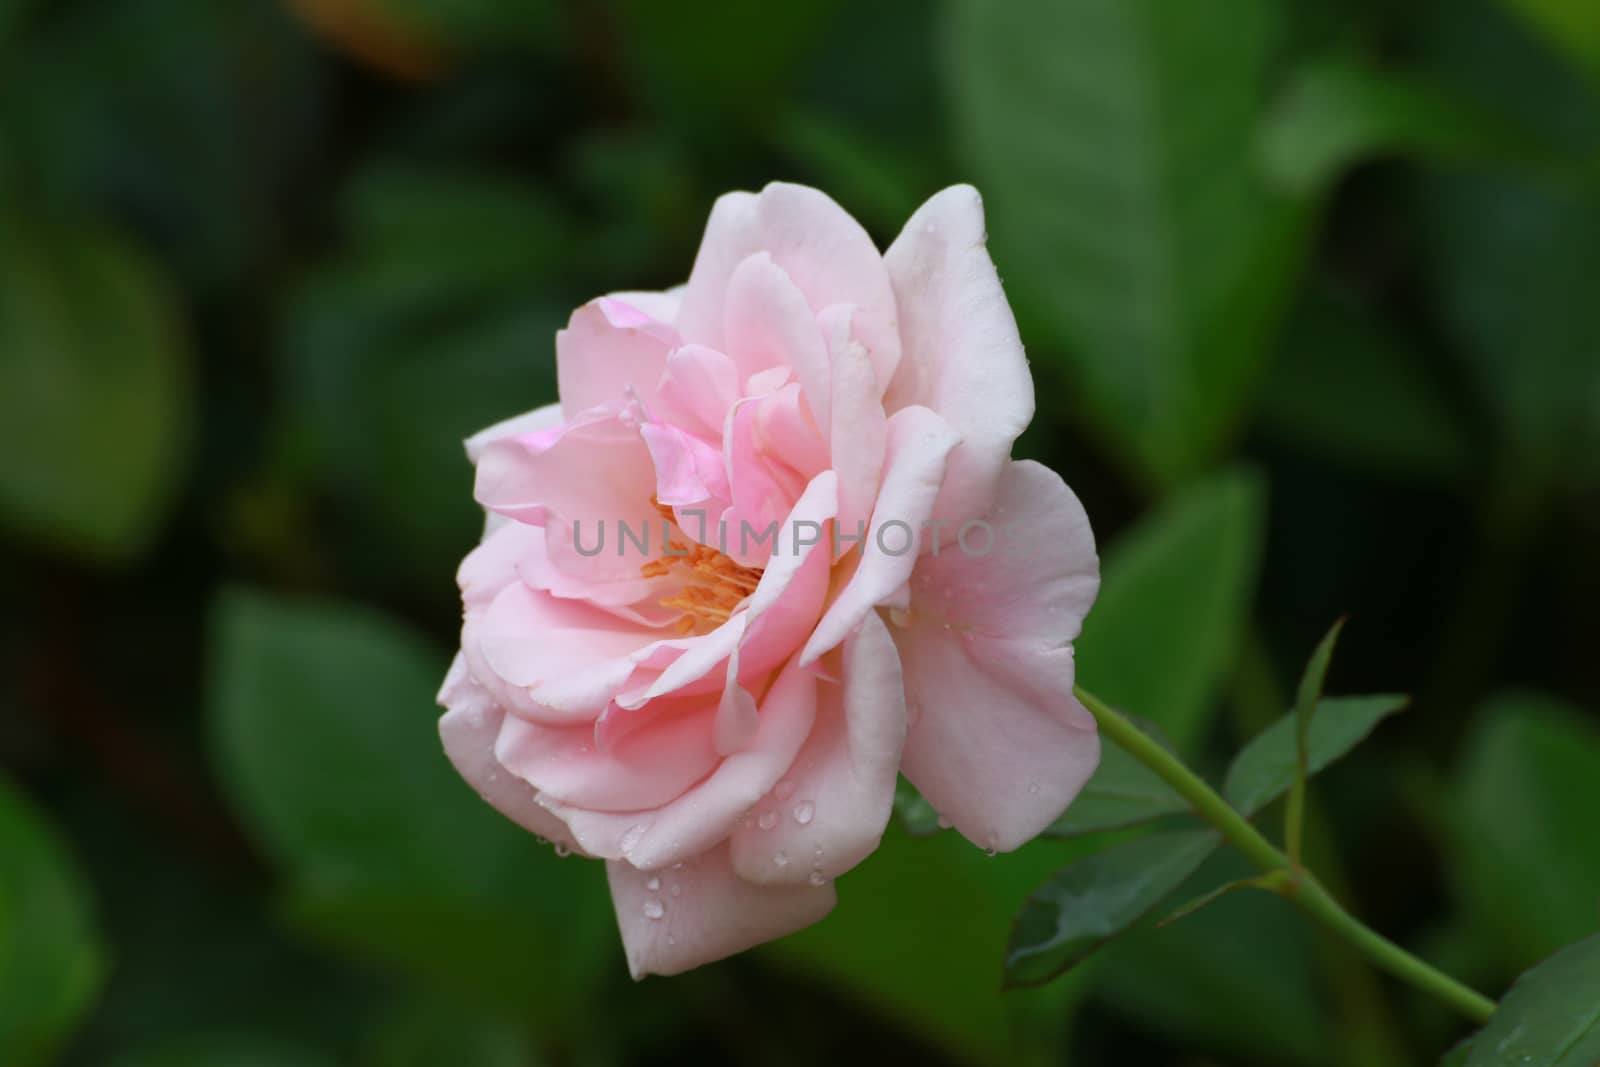 The pink rose is blooming.There is the beautiful natural.